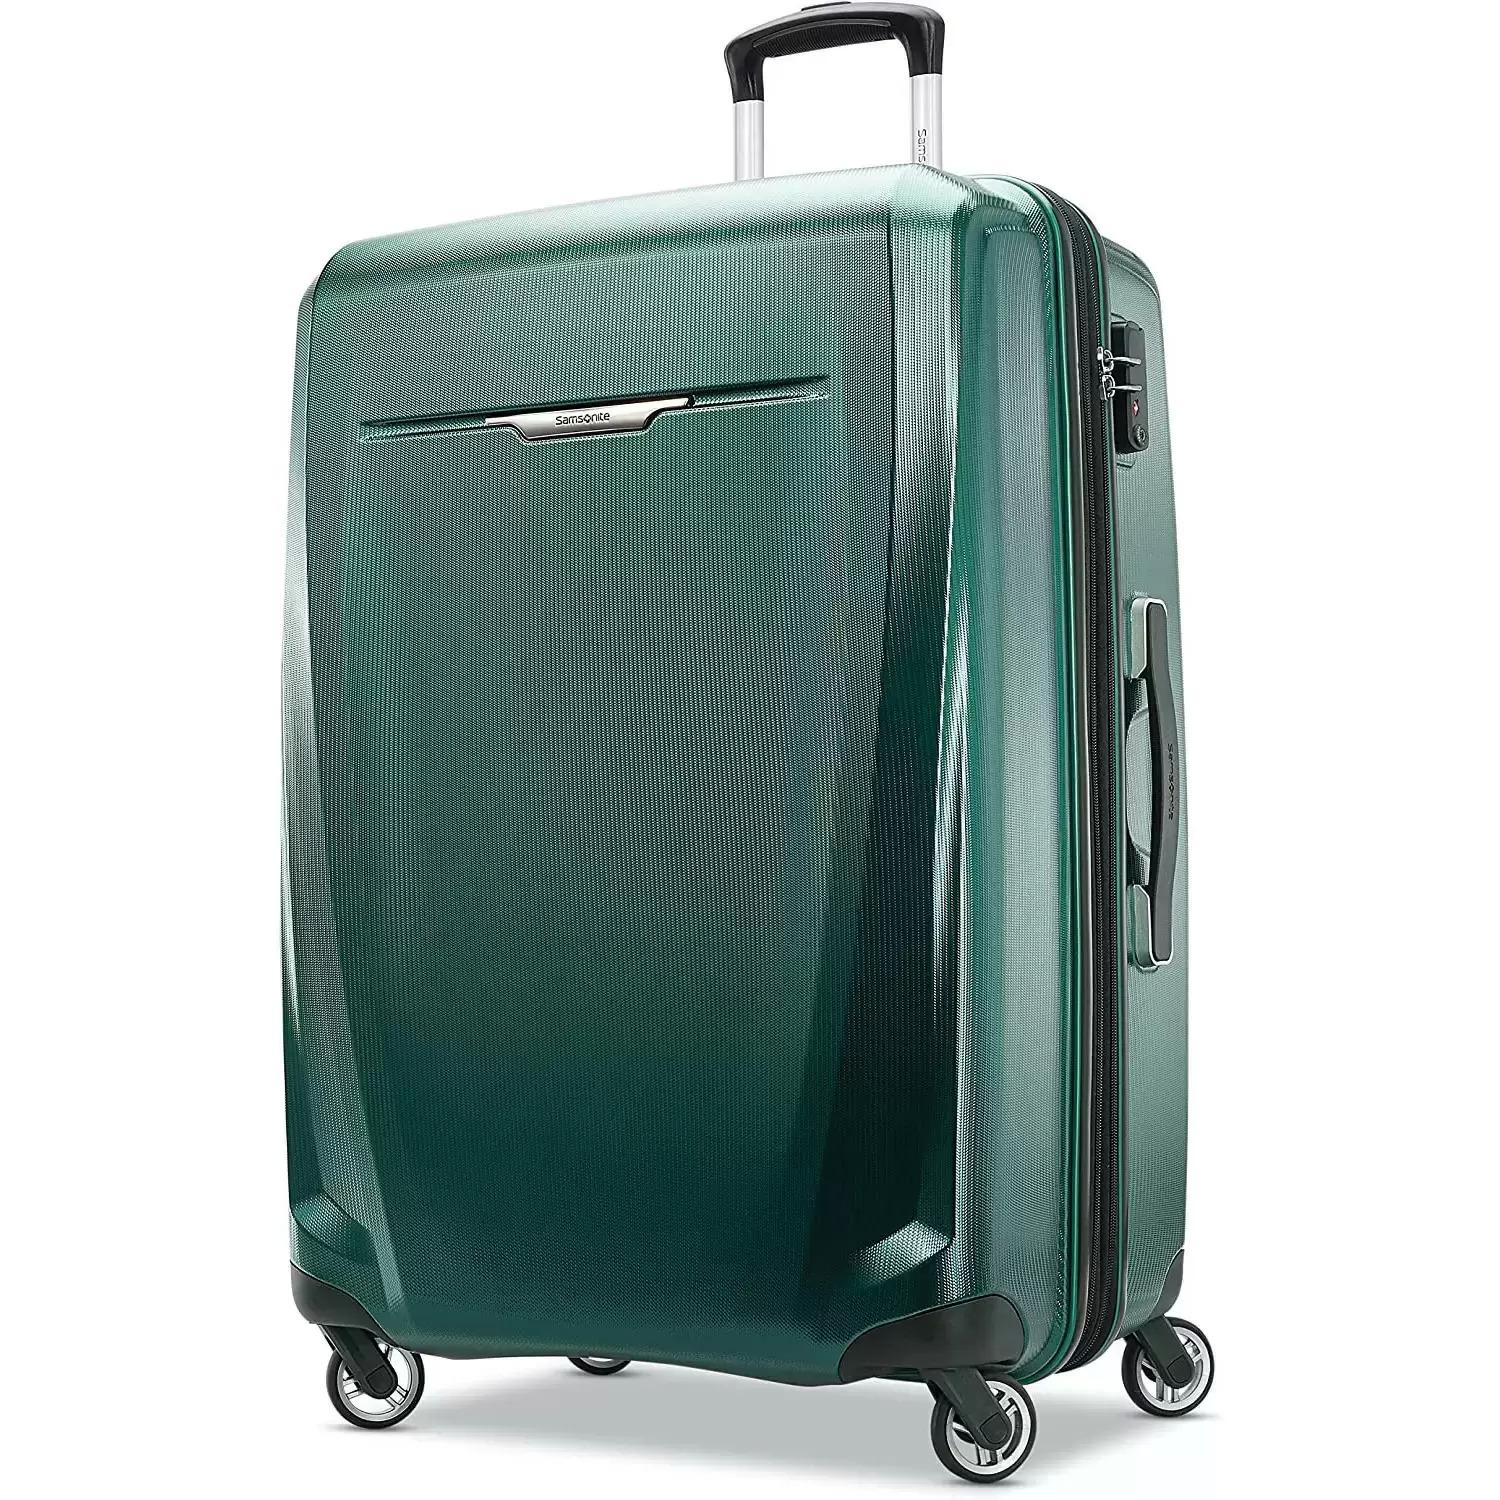 Samsonite 28in Winfield 3 DLX Hardside Expandable Luggage for $89.99